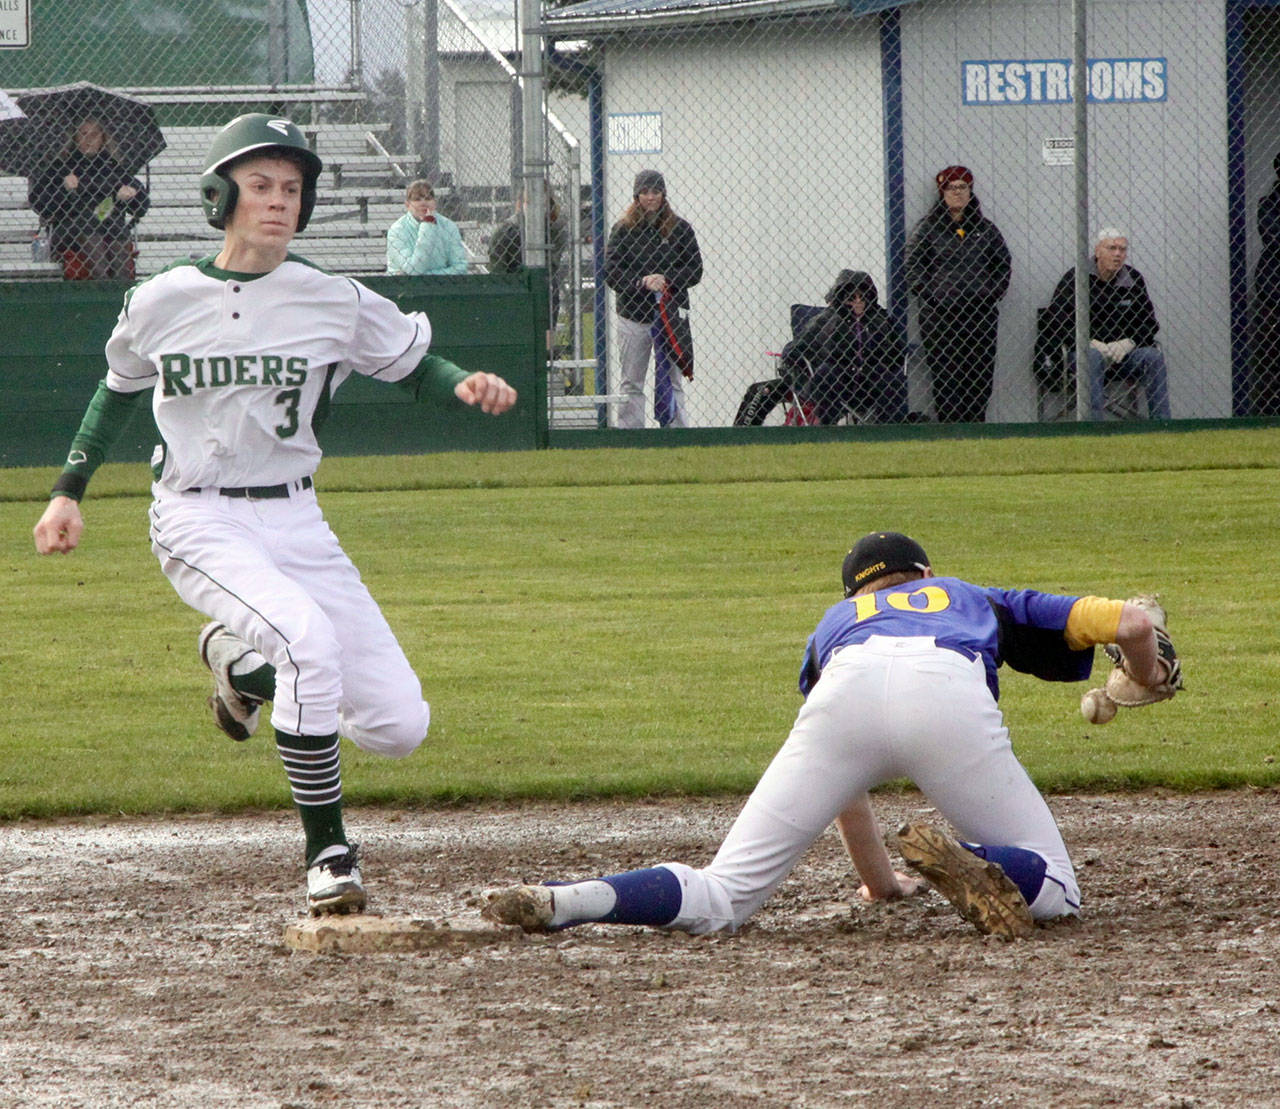 Dave Logan/for Peninsula Daily News                                Port Angeles’ Joel Wood reaches first base safely as the throw to Bremerton first baseman Sawyer Singer was low in the dirt.